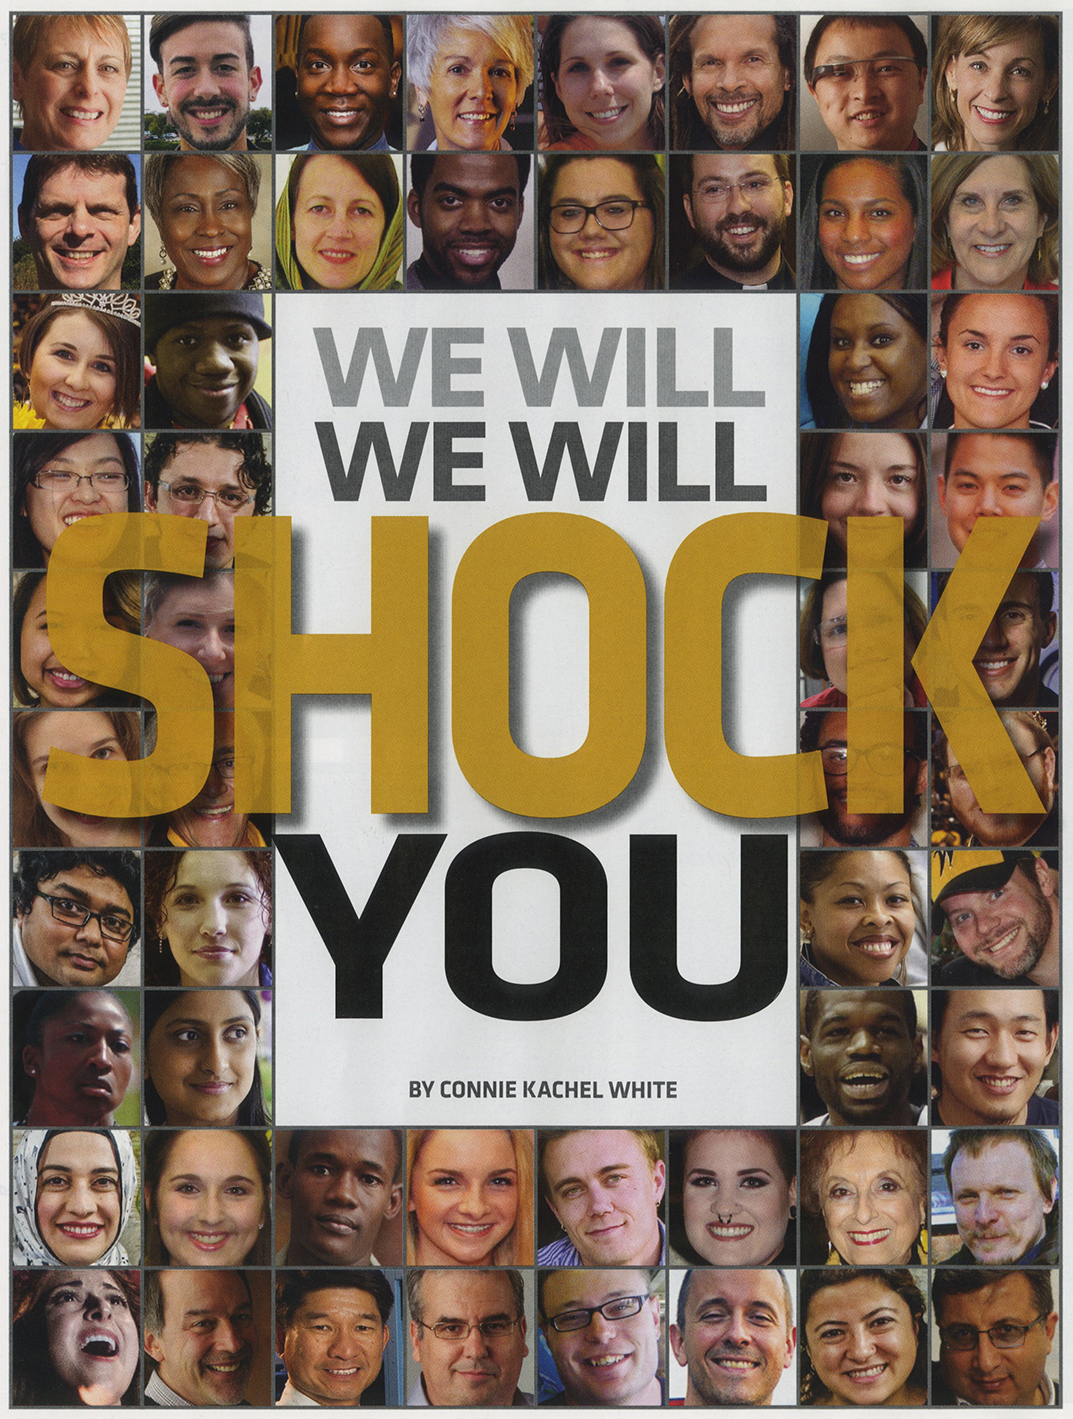 We Will Shock You